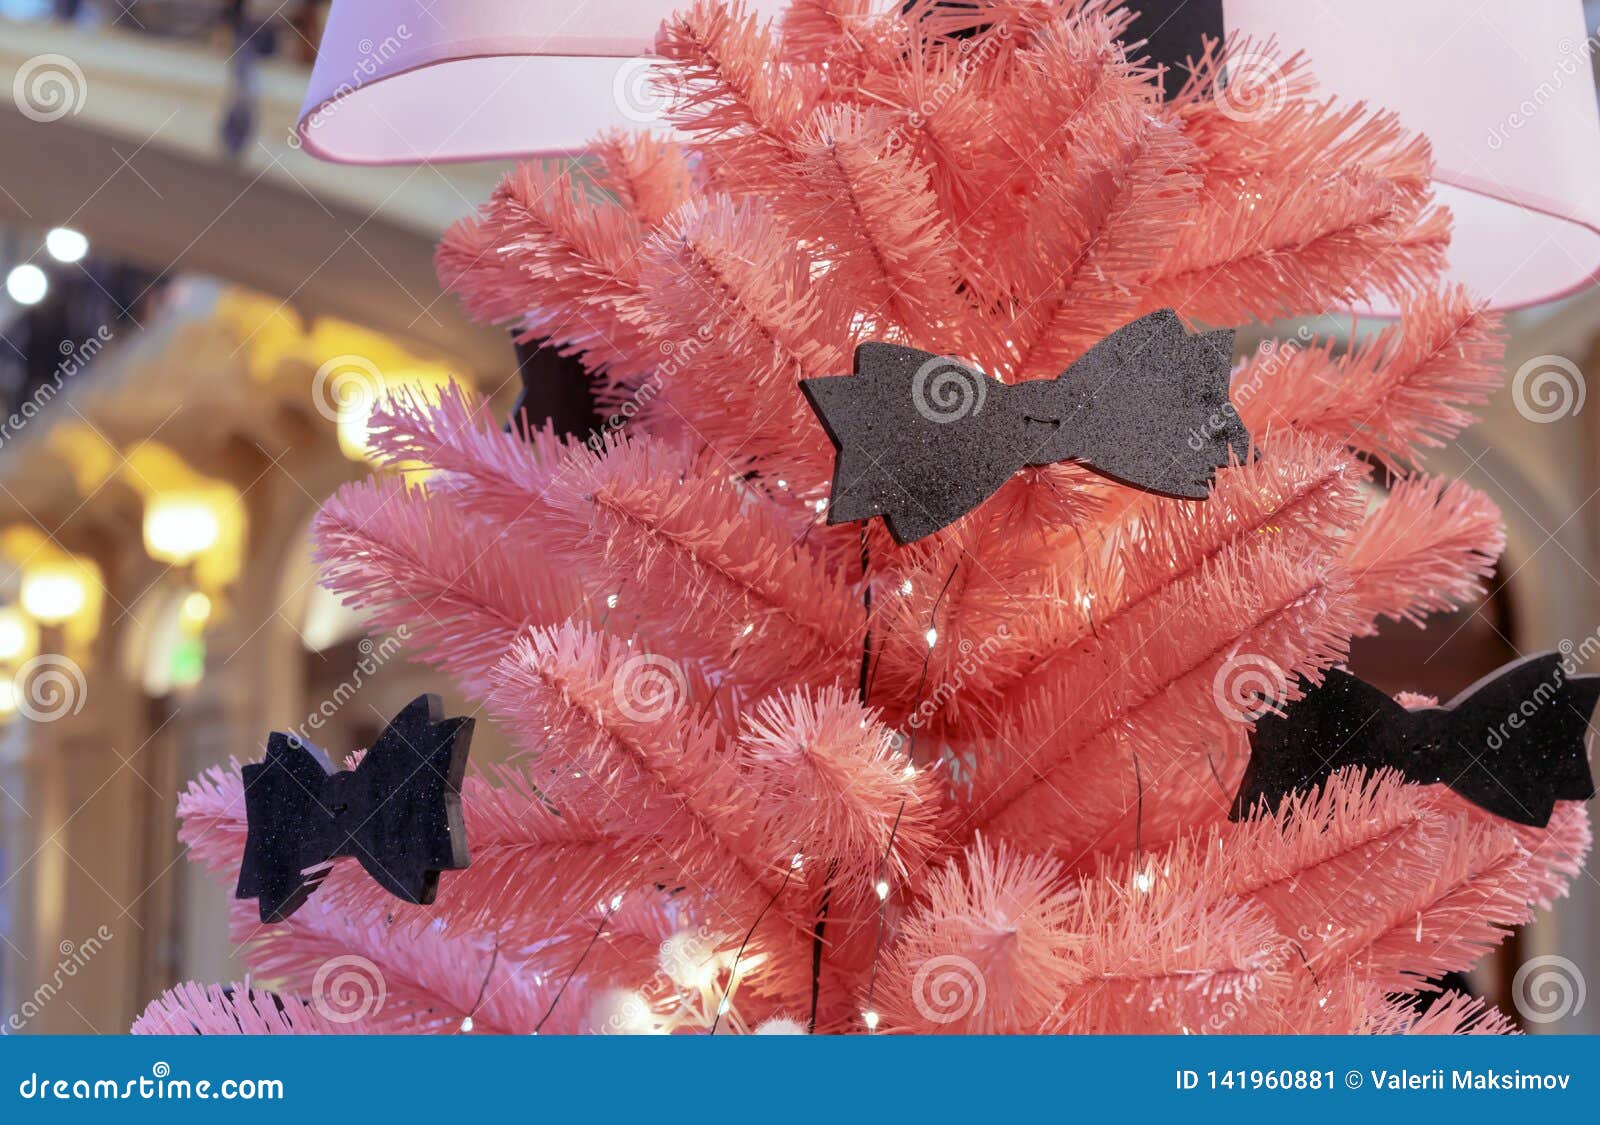 Pink Christmas Tree Decorated with Black Bows Stock Image - Image of ...